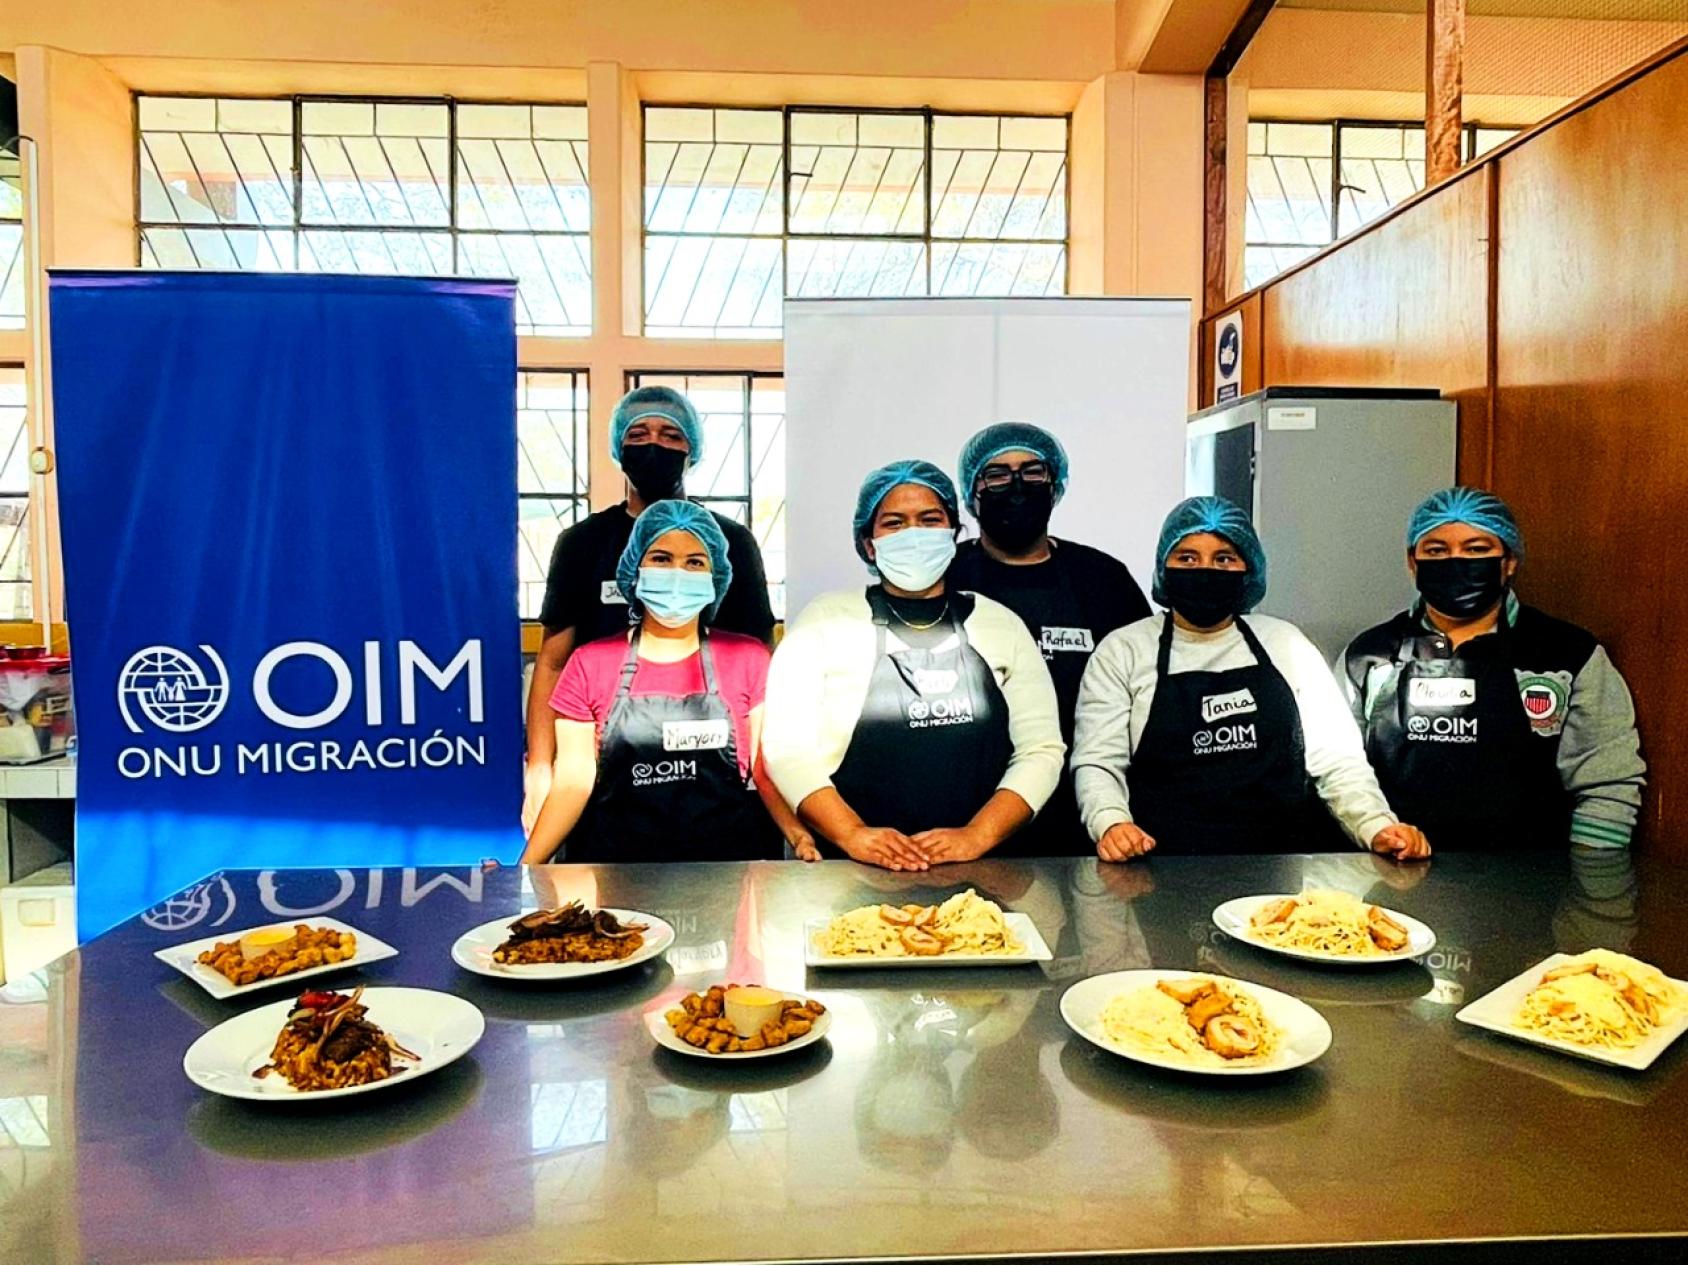 A group of six chefs stand at a table with their dishes displayed next to a blue IOM banner